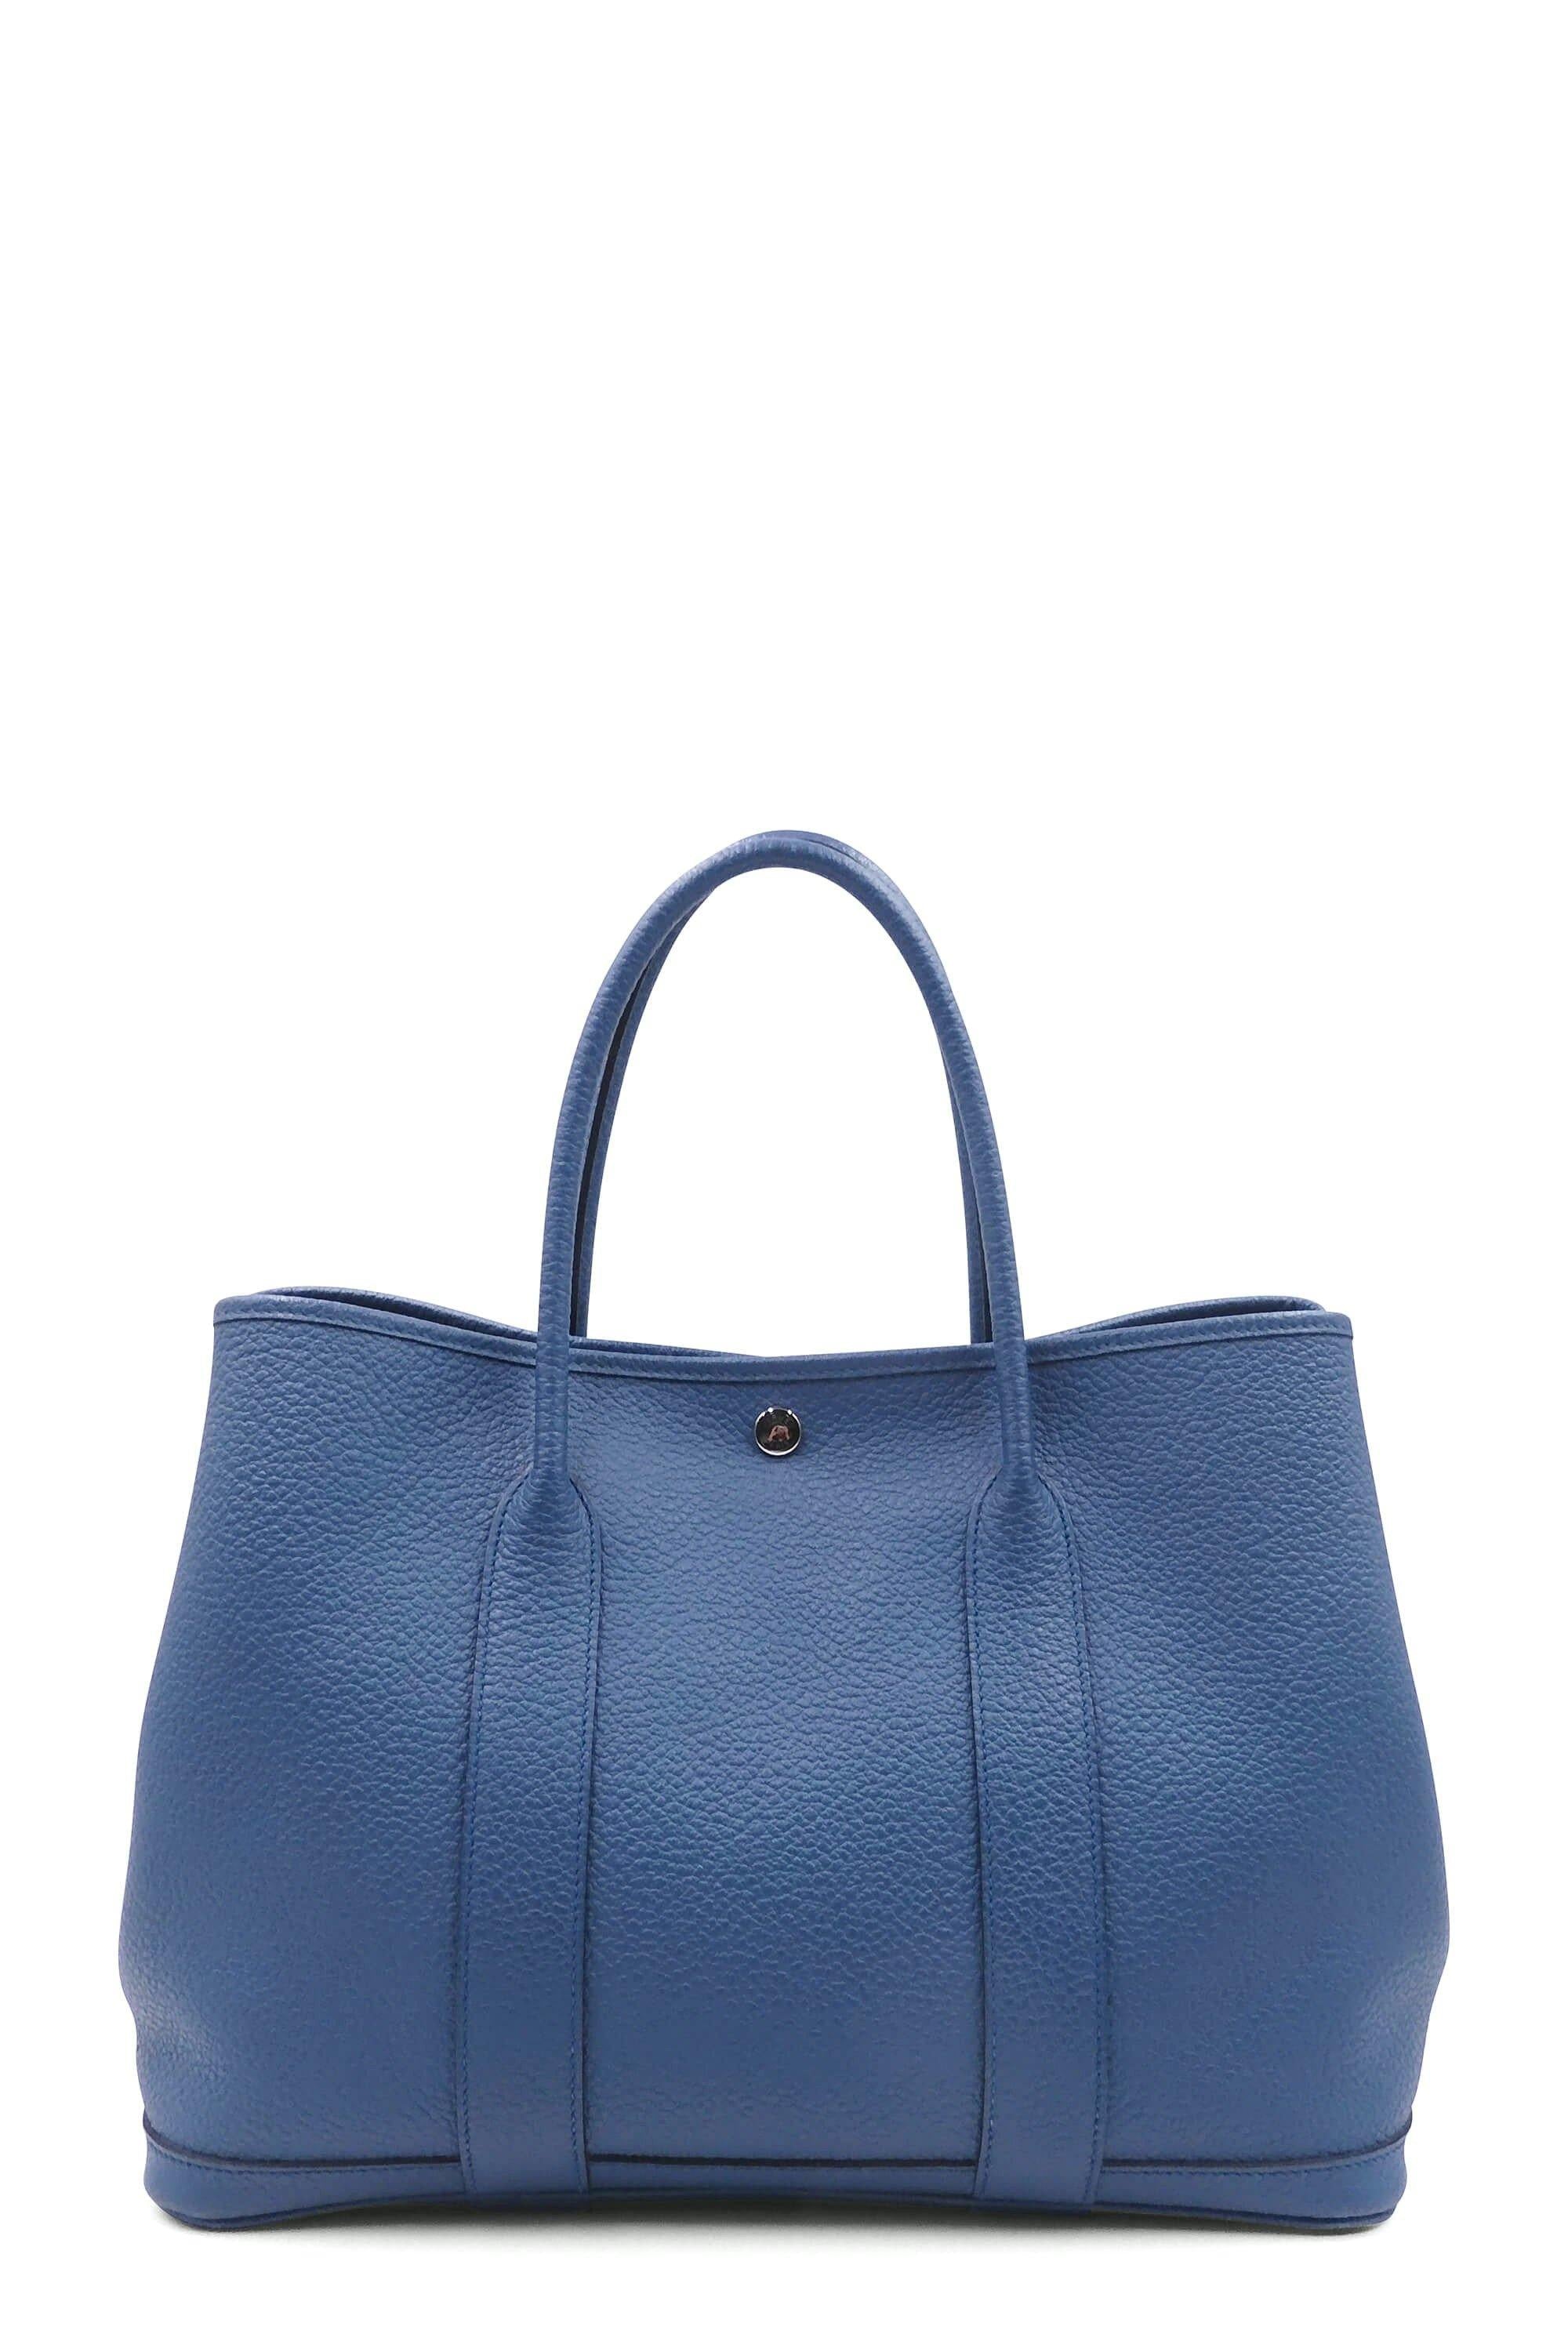 Gorgeous Hermès Garden Party 36 Tote bag in Blue Denim Canvas and Leather,  SHW For Sale at 1stDibs